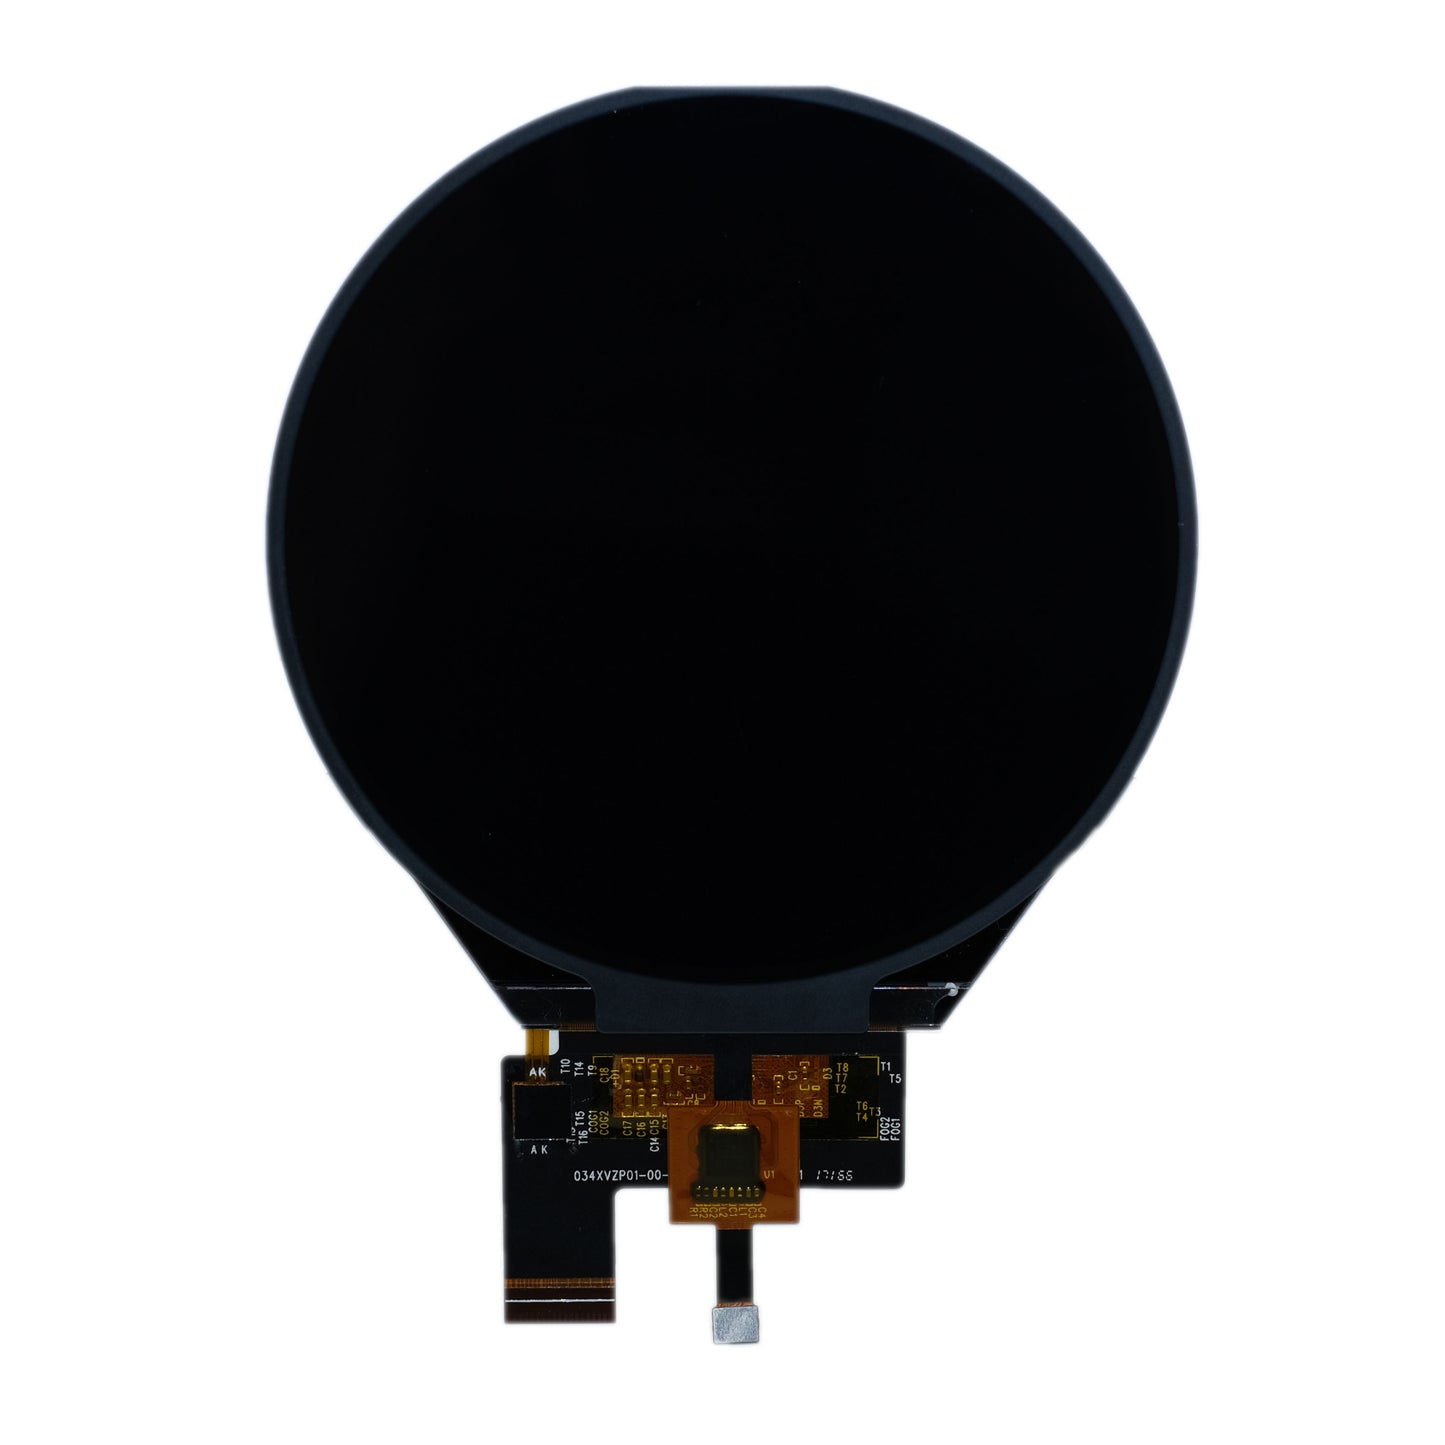 3.4-inch round TFT display panel with 800x800 resolution, 16 million colors, capacitive touch, and MIPI interface